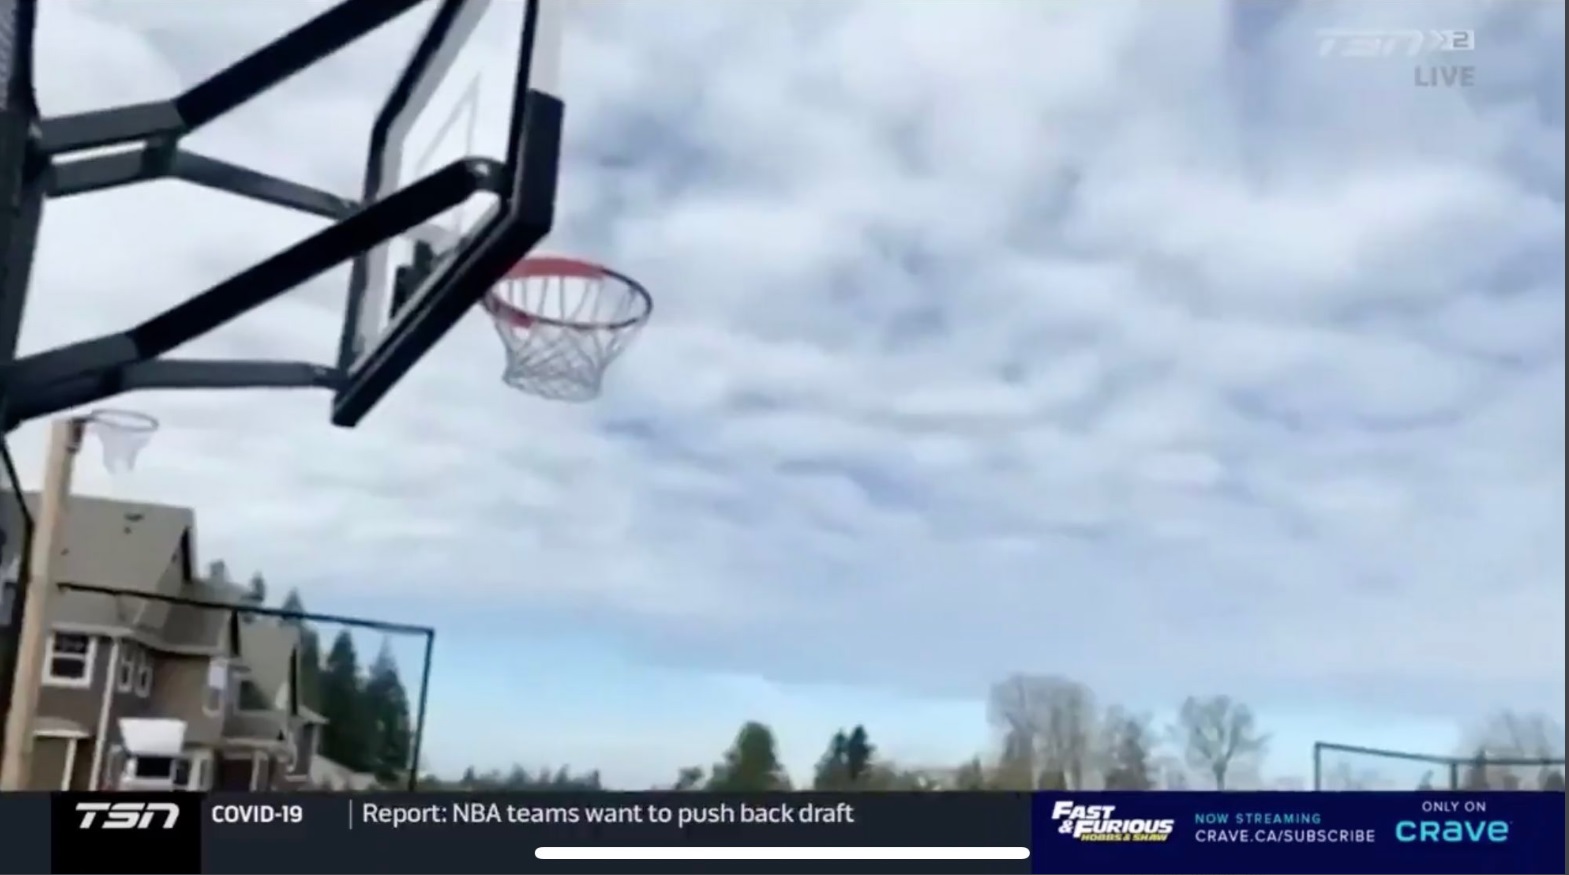 PHOTO Zach LaVine Has A 15 Foot Basketball Hoop Without A Backboard